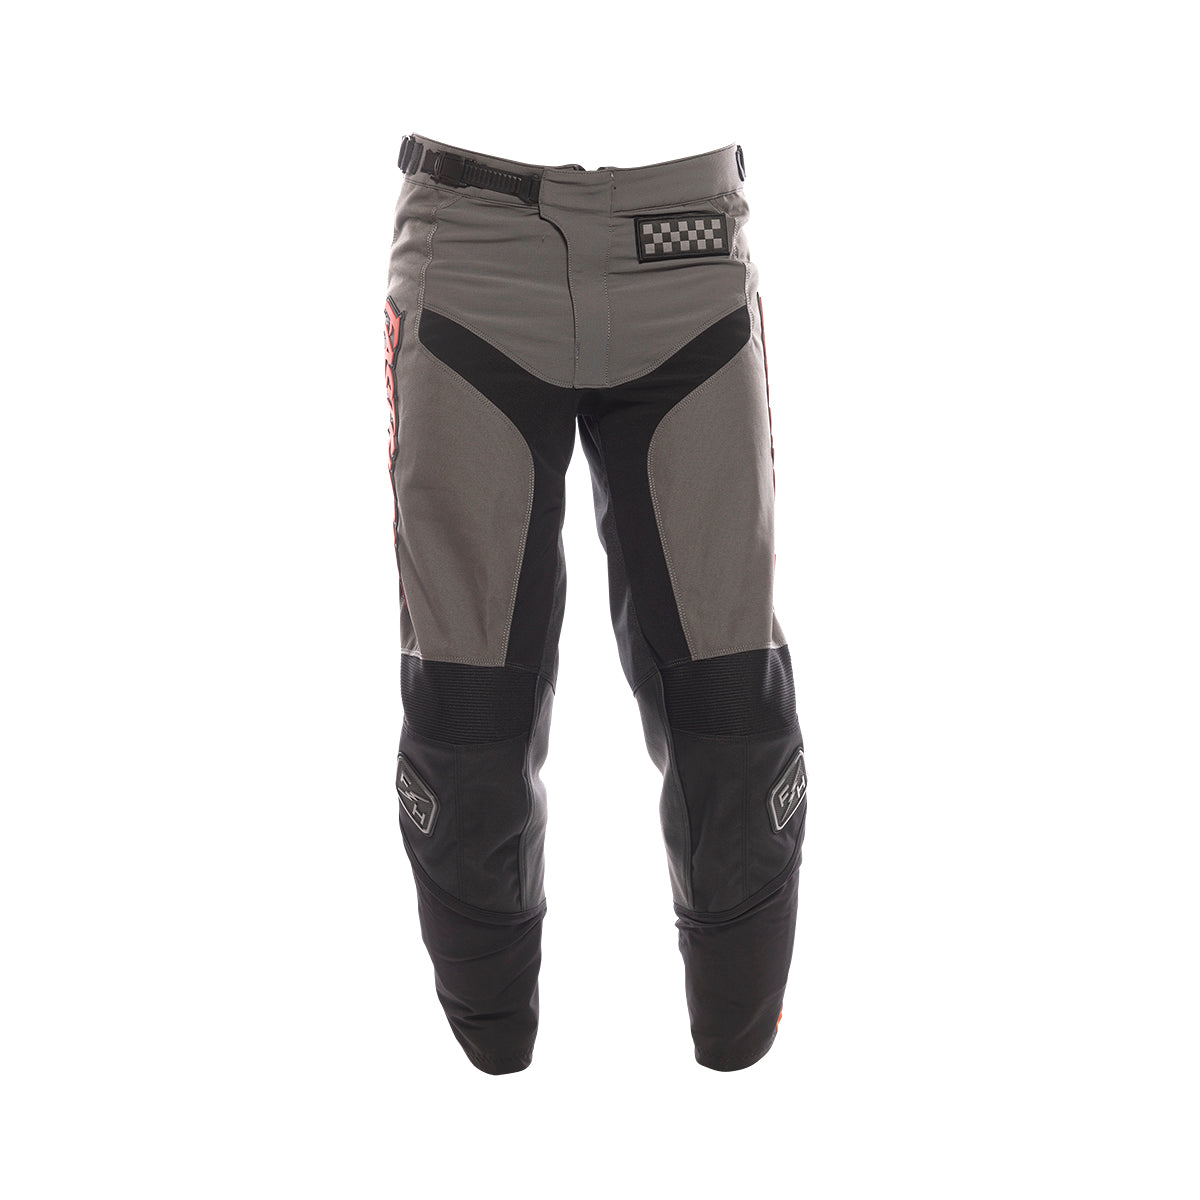 Grindhouse Youth Pant - Gray/Red